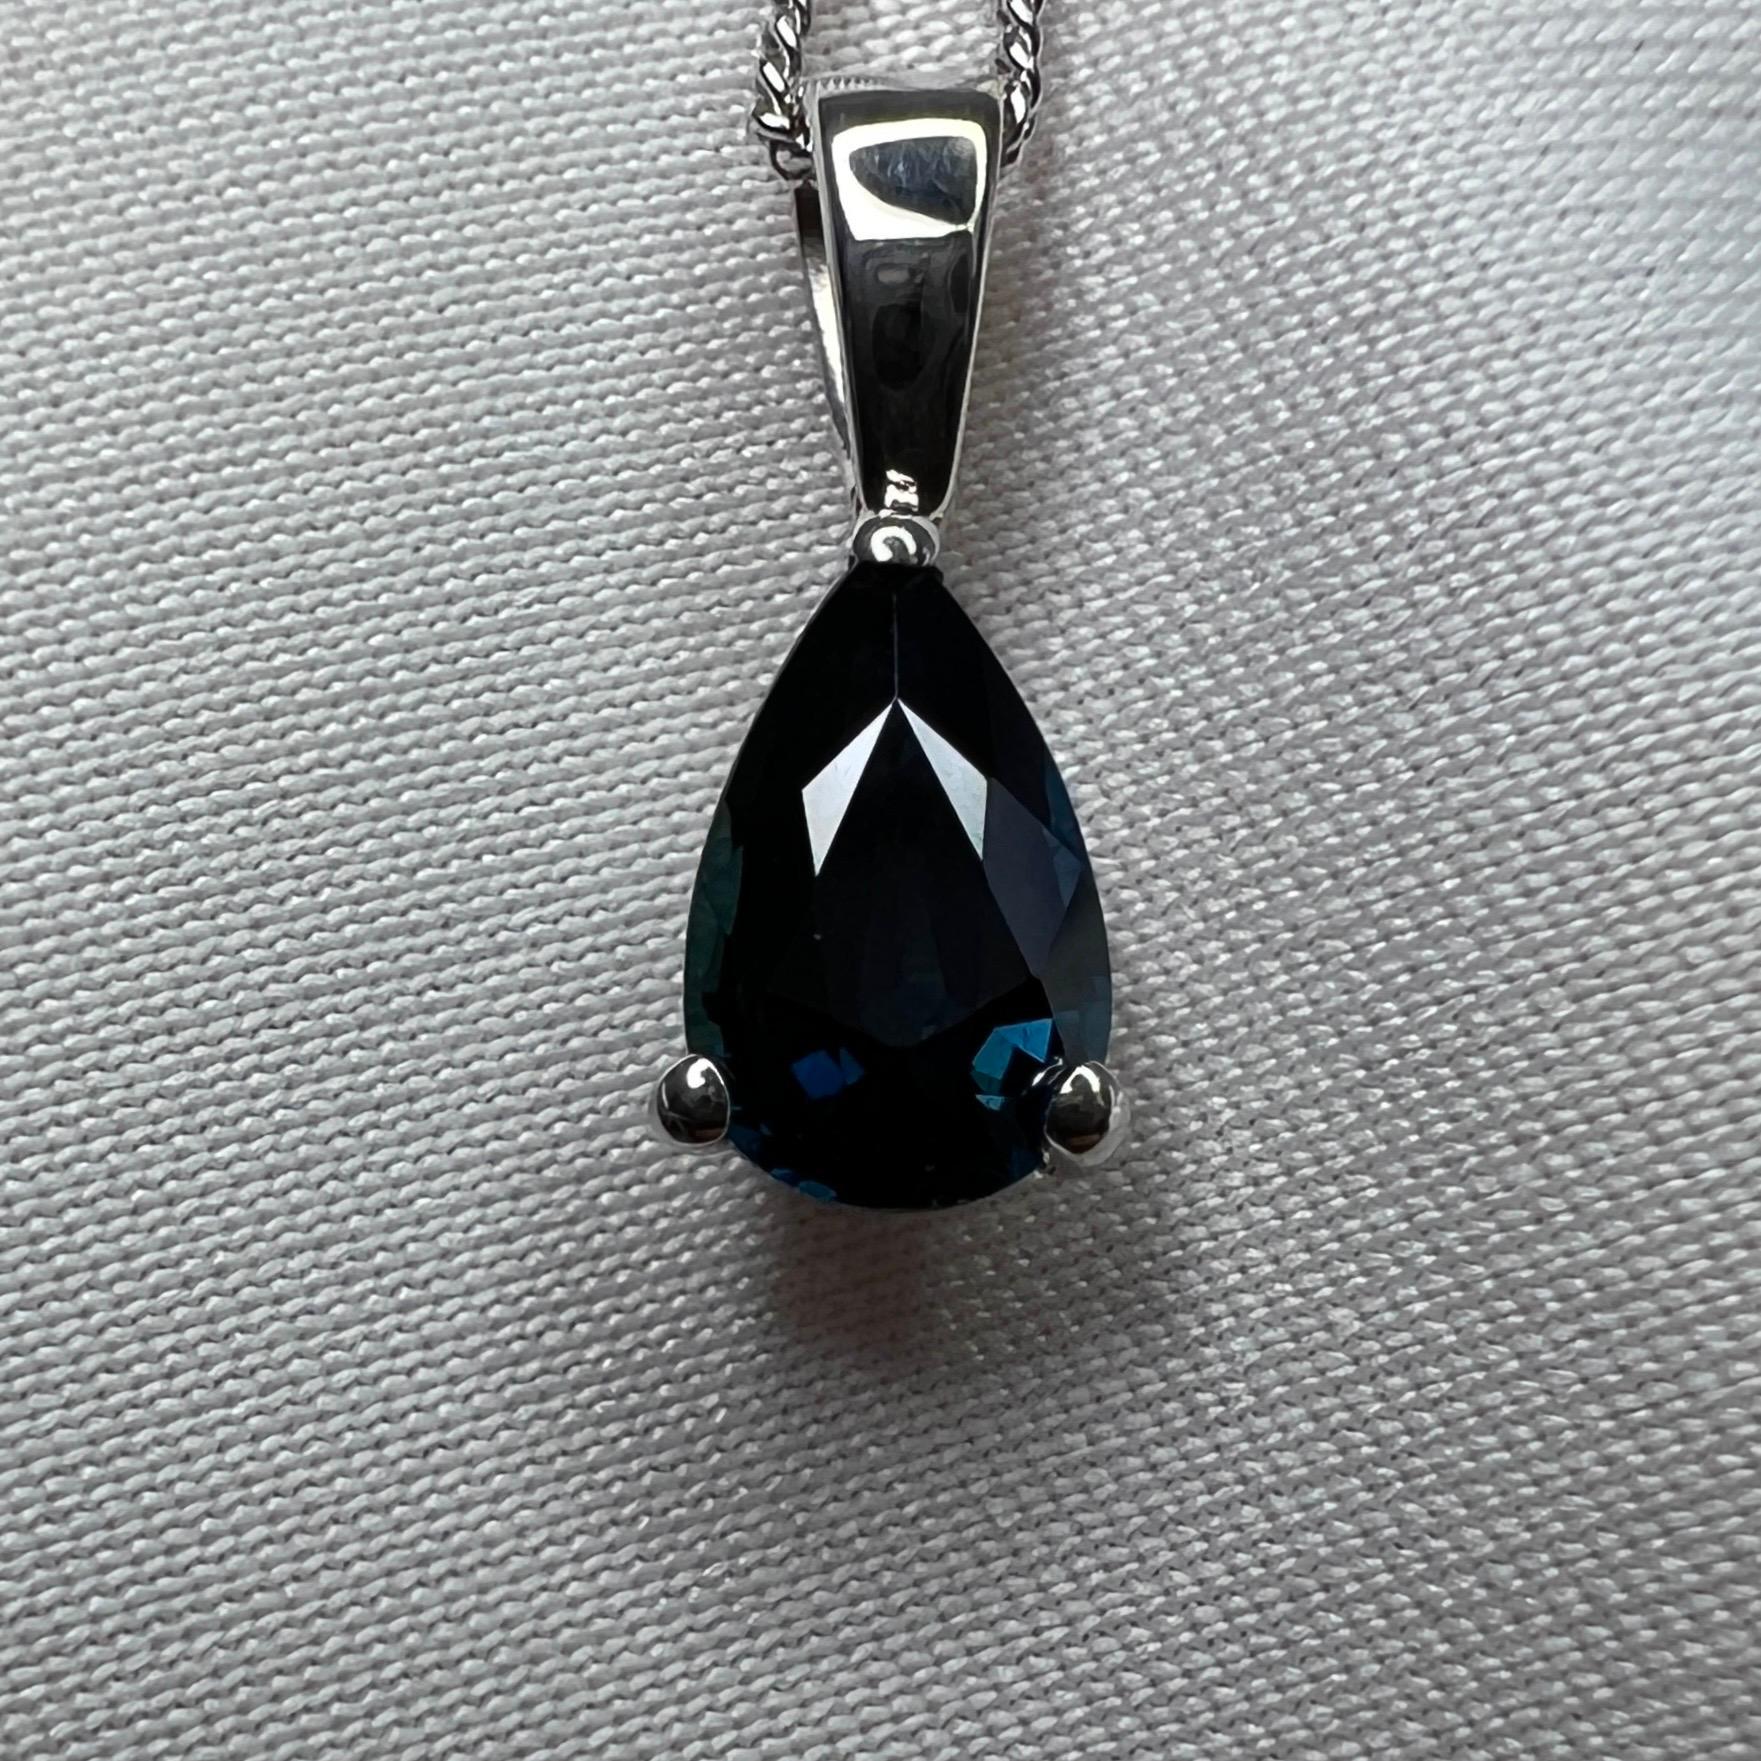 GIA Certified Untreated Deep Blue Sapphire 18k White Gold Pendant Necklace.

1.07 Carat blue sapphire with a fine deep blue colour and excellent clarity. Very clean stone.
Totally untreated and unheated, very rare for natural sapphires. Confirmed on